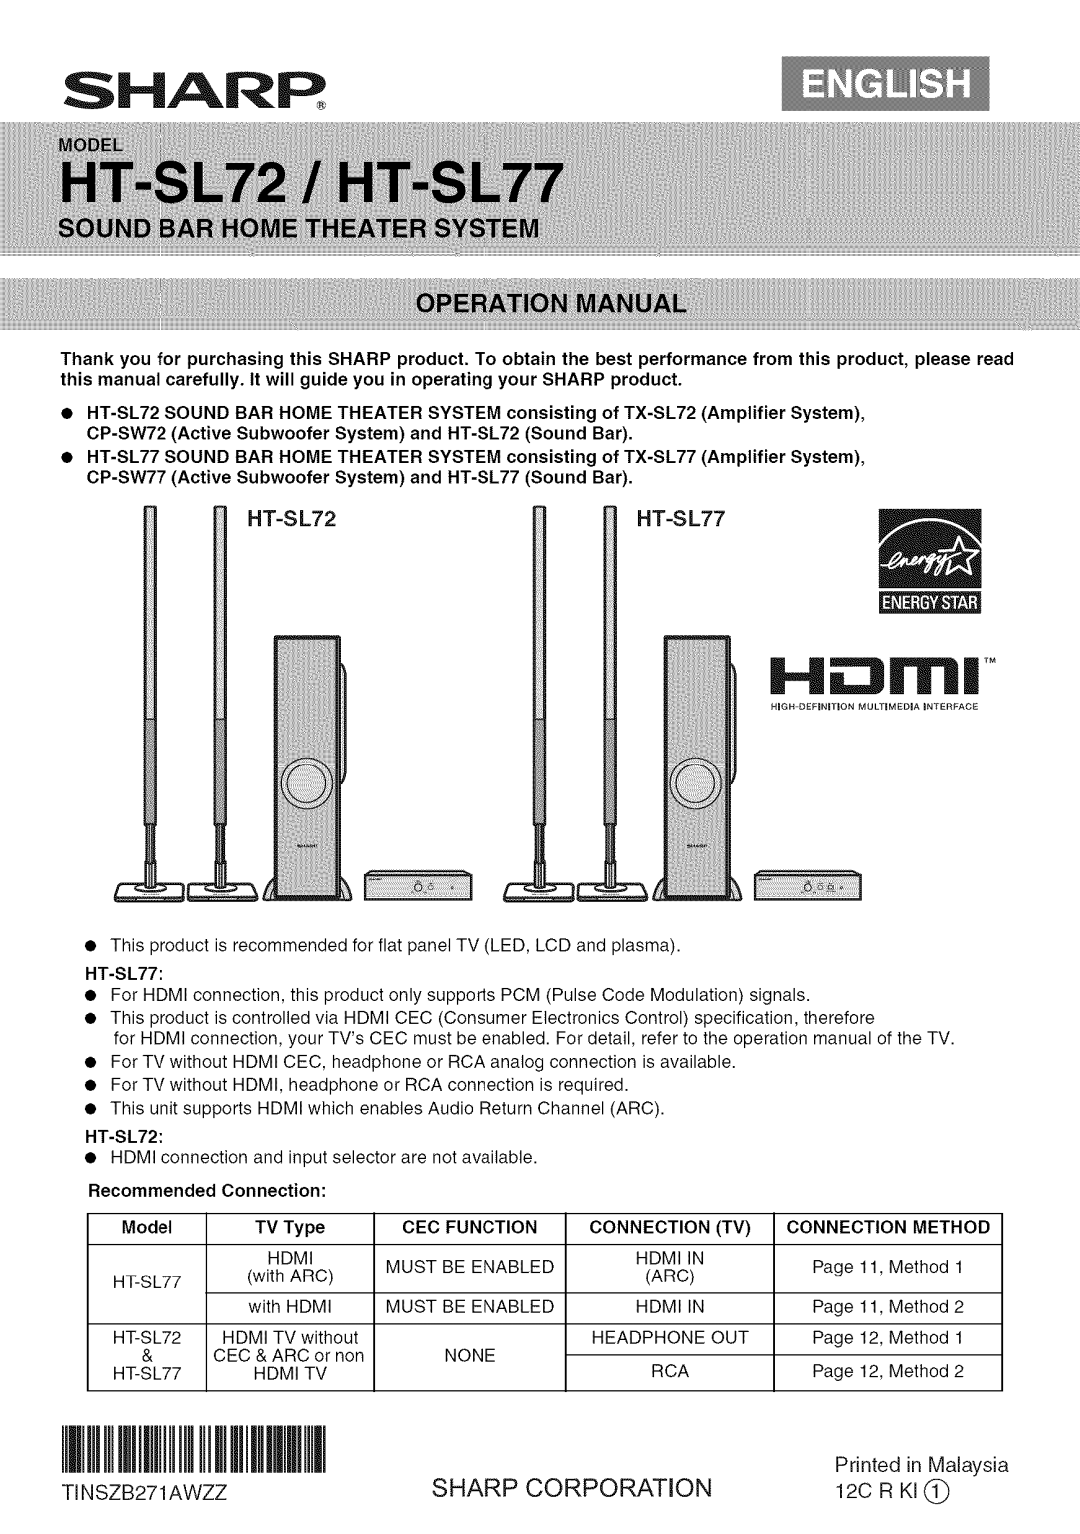 Sharp dimensions HT-SL72U, Model Overview, HT-SL72KEY FEATURES, Weight & Dimensions 